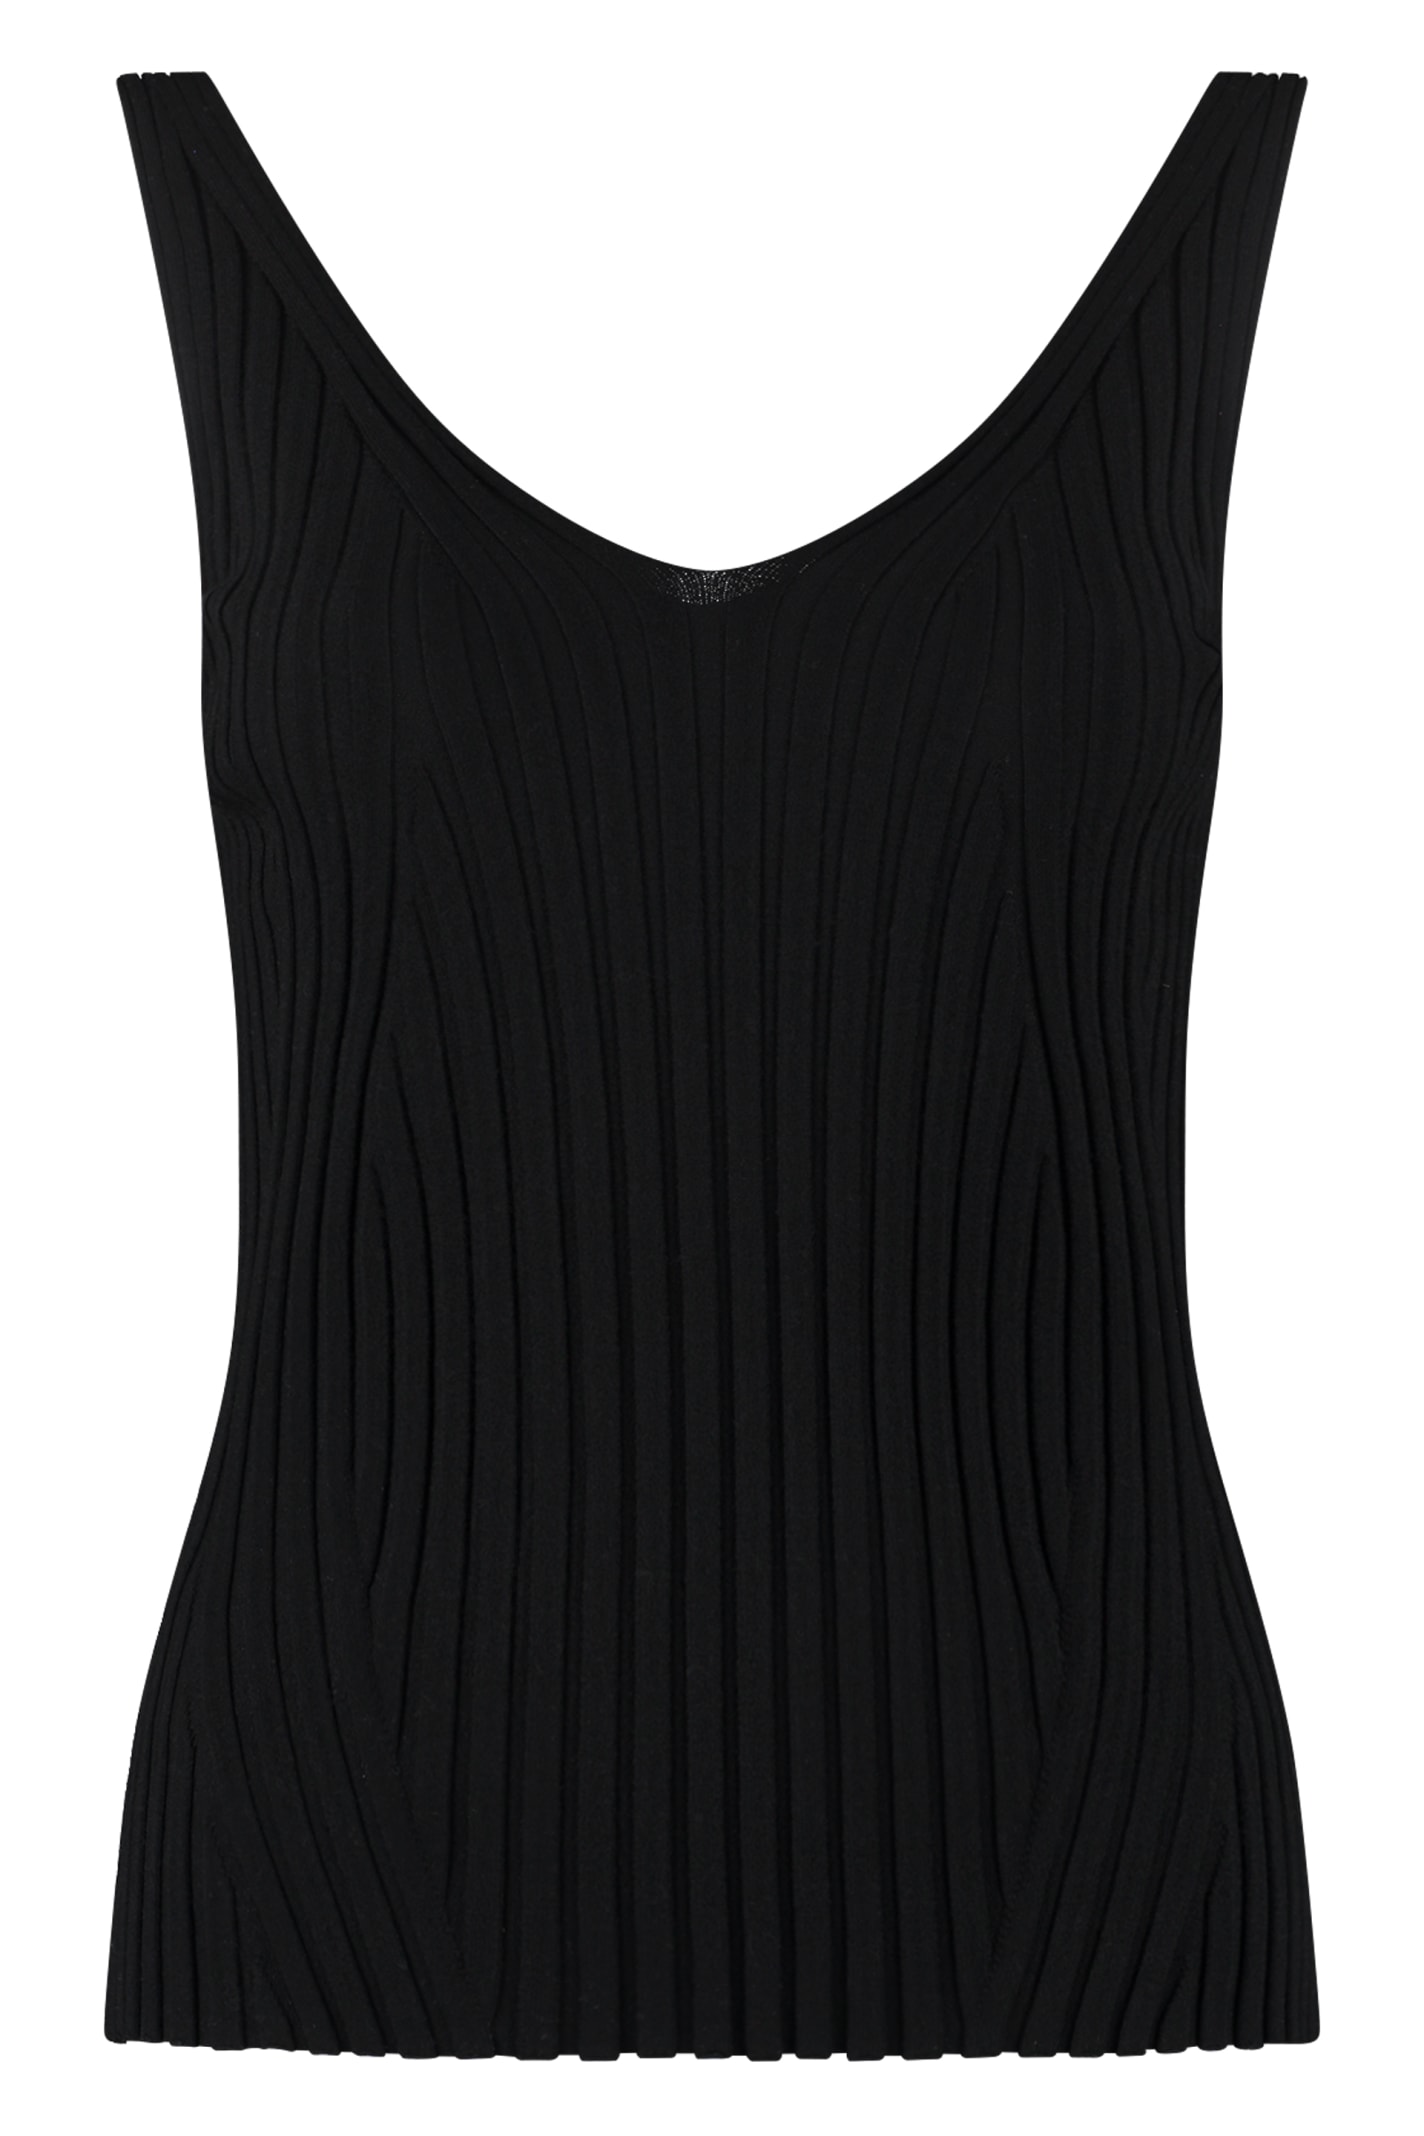 Rodebjer Brigitte Ribbed Knit Top